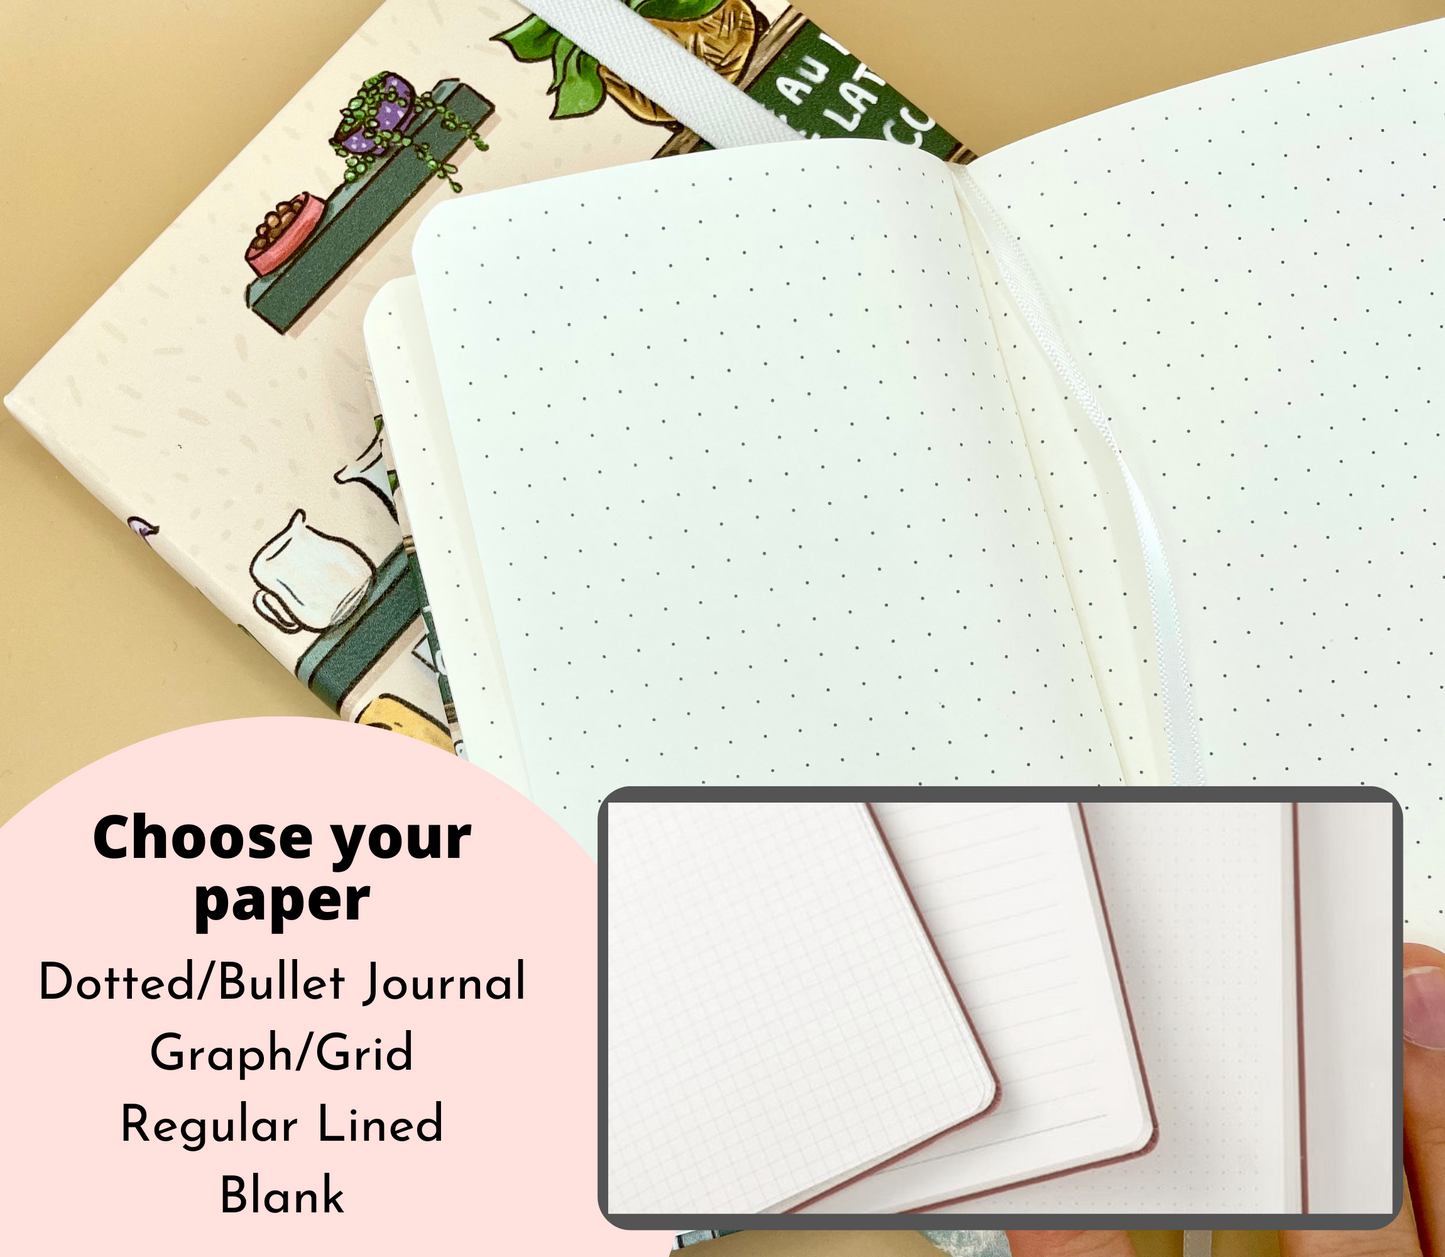 Bunny Airplane Notebooks | A5, A6 | Grid, Dotted Bullet Journal | Travel Journal